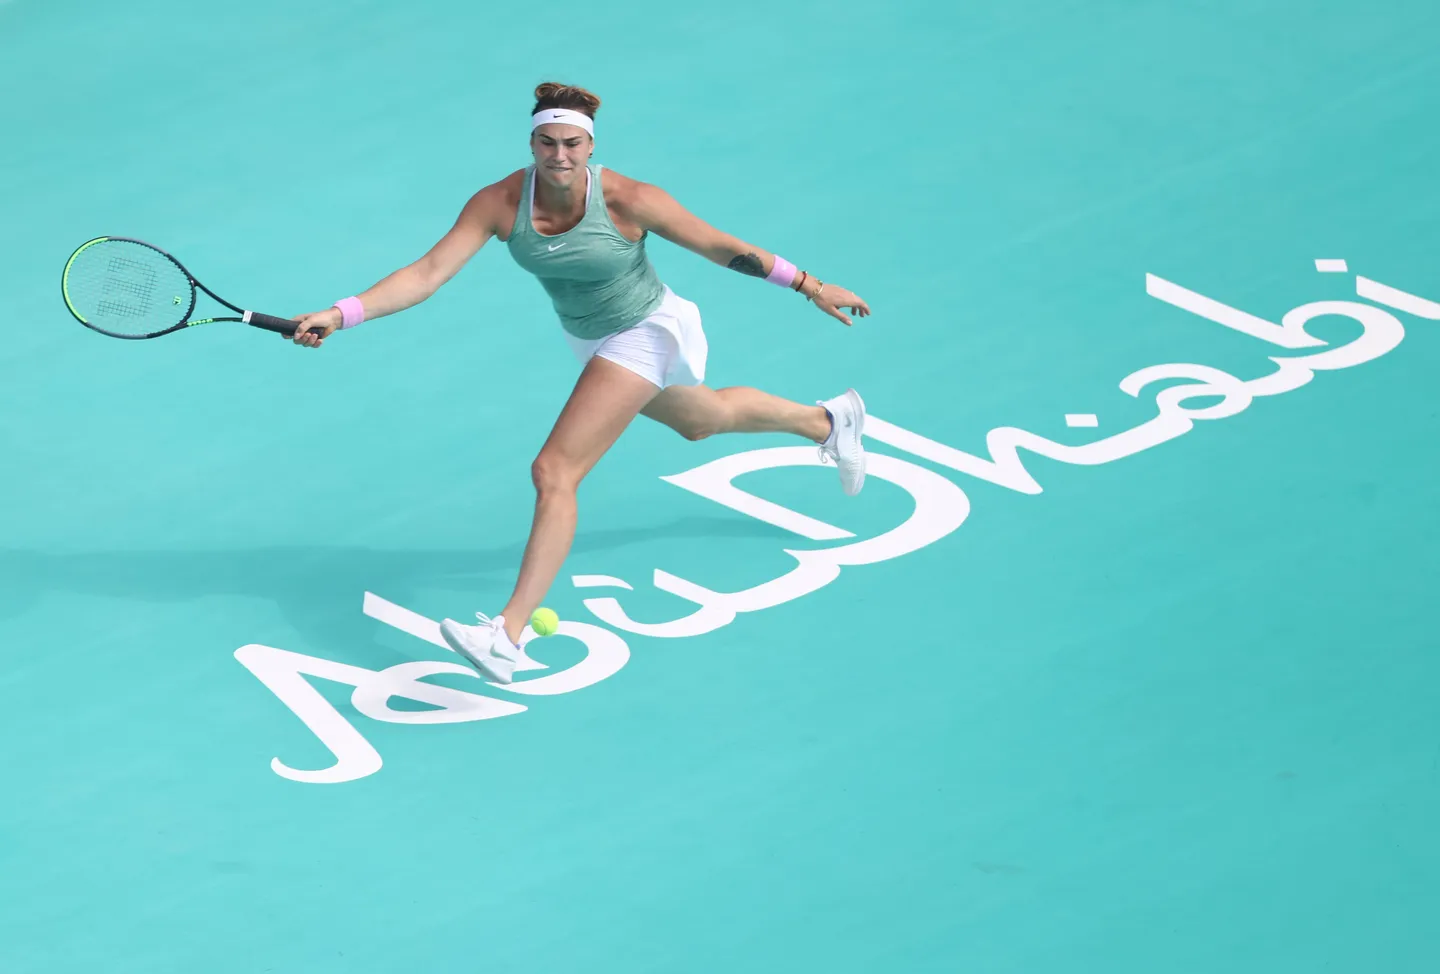 Abu-Dhabi Is The First Permanent WTA Tour Location In The Middle East